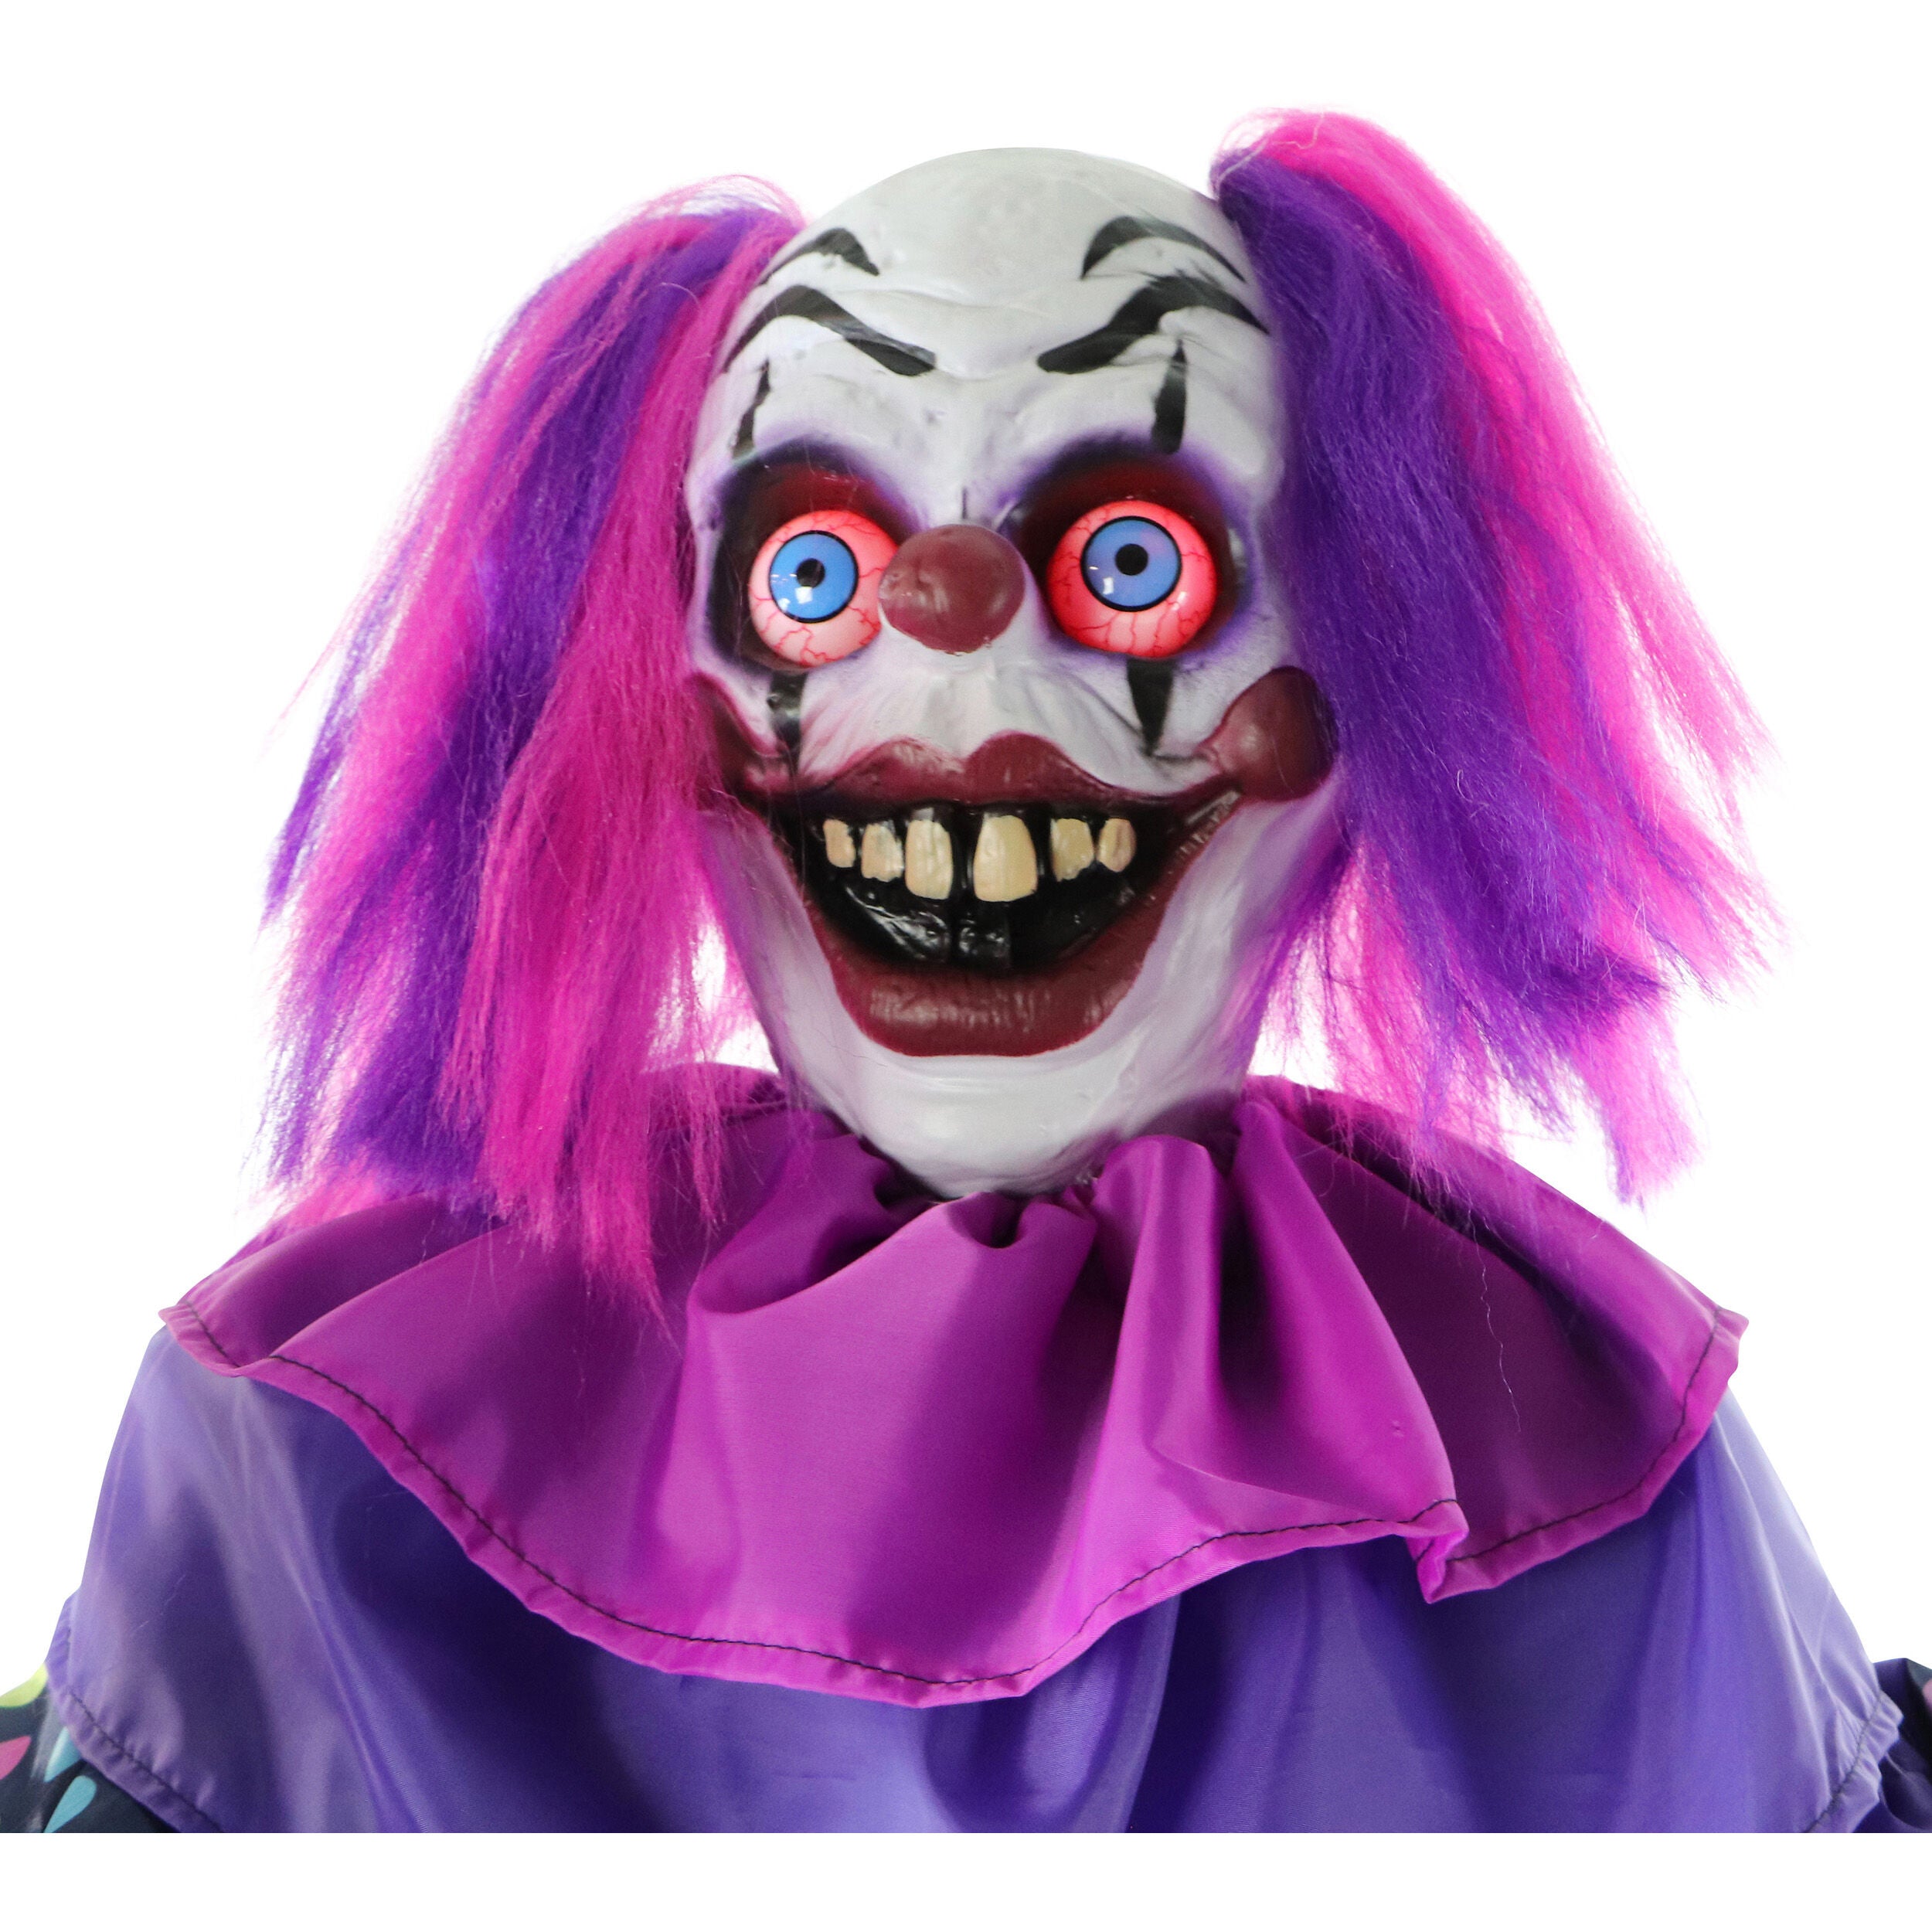 Haunted Hill Farm - Animatronic Talking Clown with Waving Hand and Light-Up Eyeballs for Scary Halloween Decoration